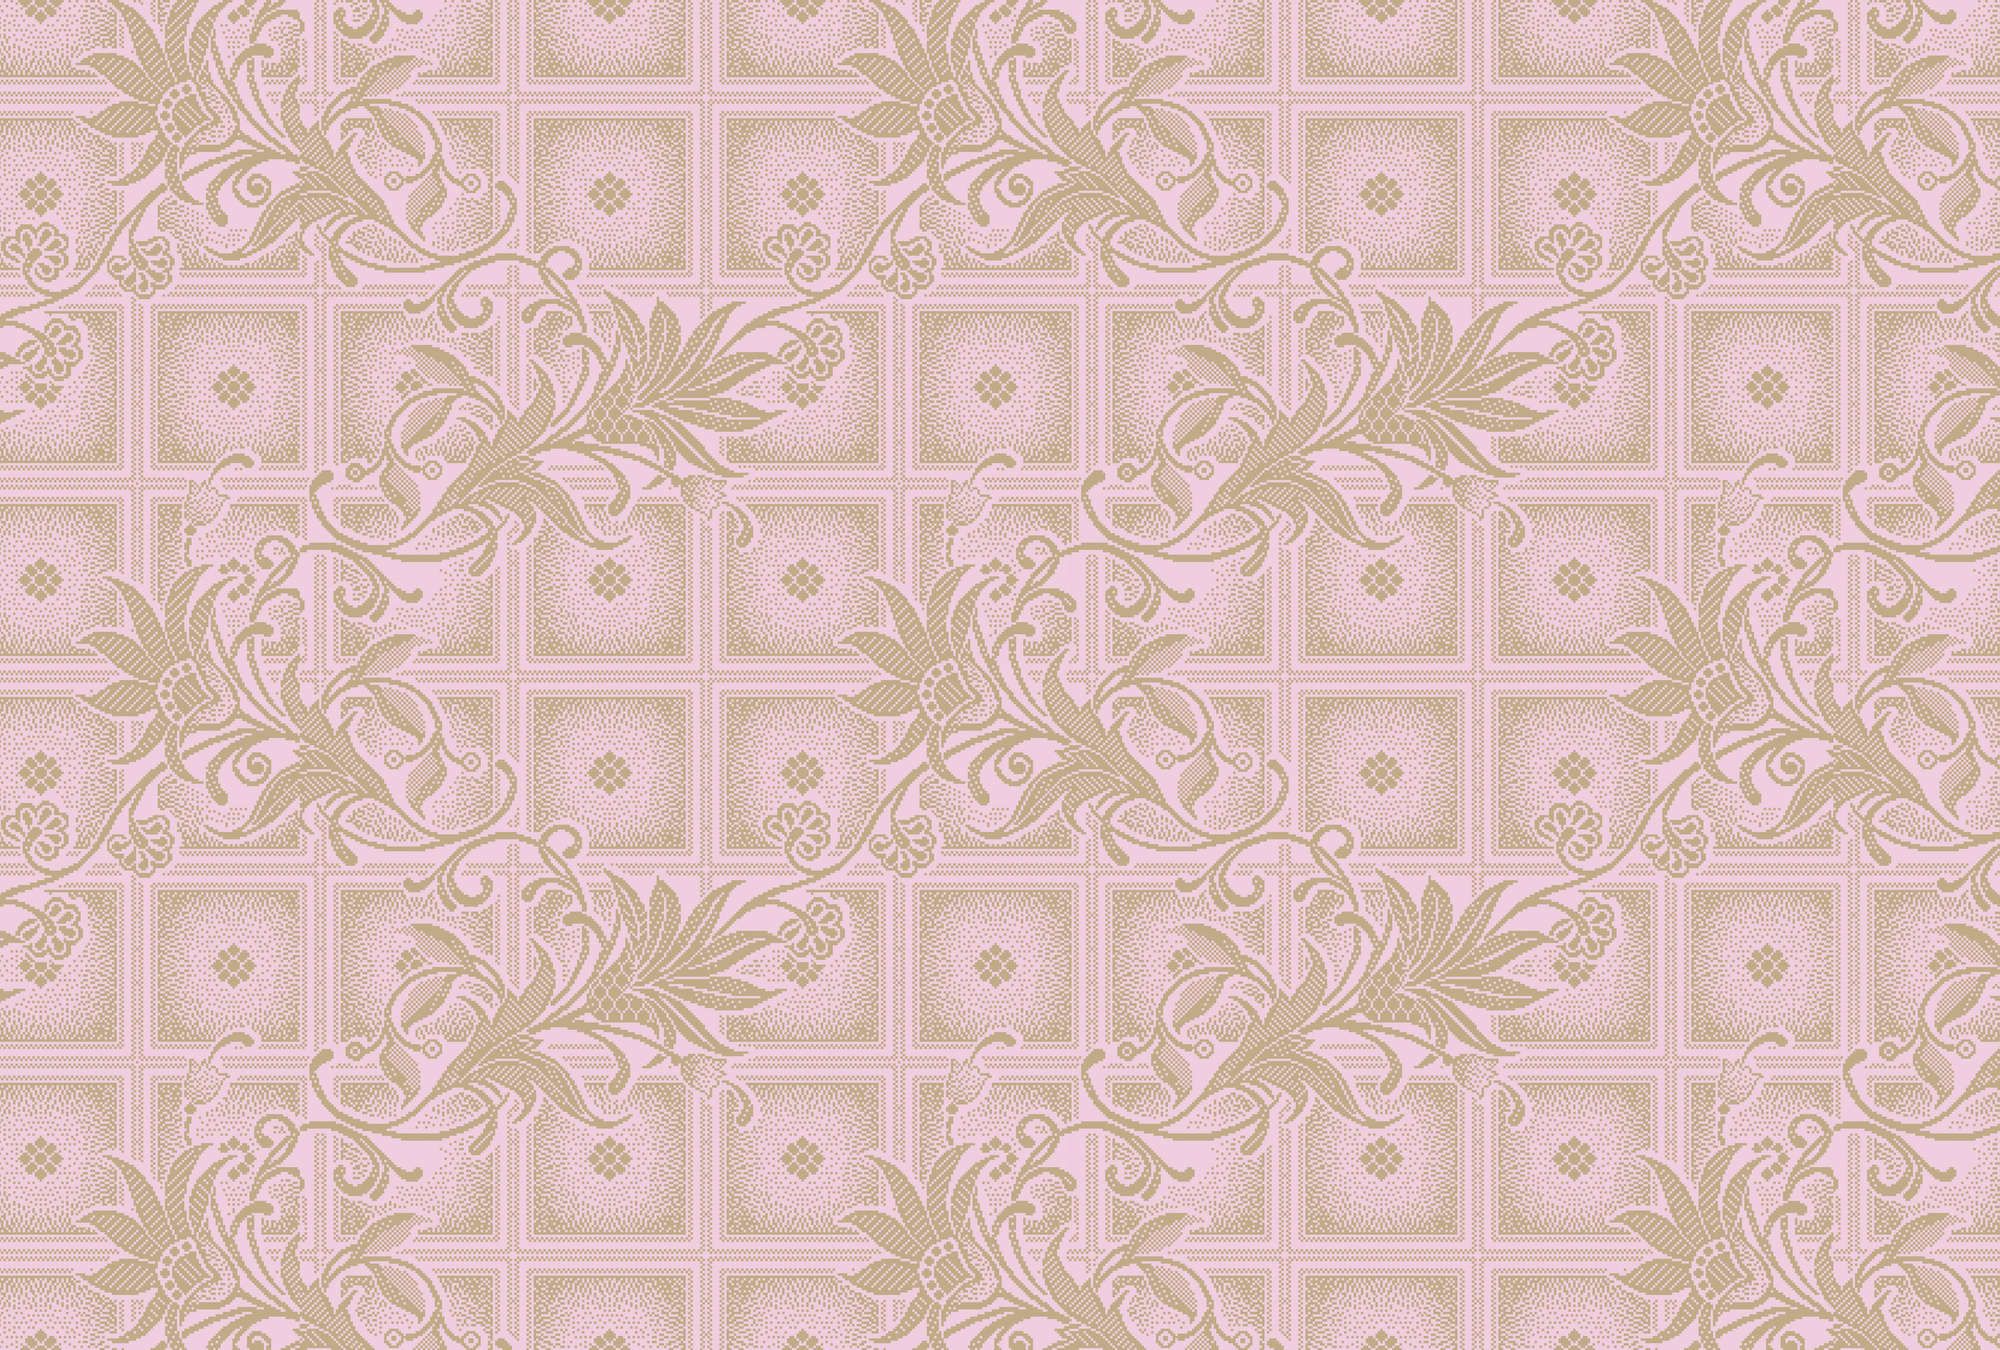             Photo wallpaper »vivian« - Pixel style squares with flowers - Pink | Smooth, slightly shiny premium non-woven fabric
        